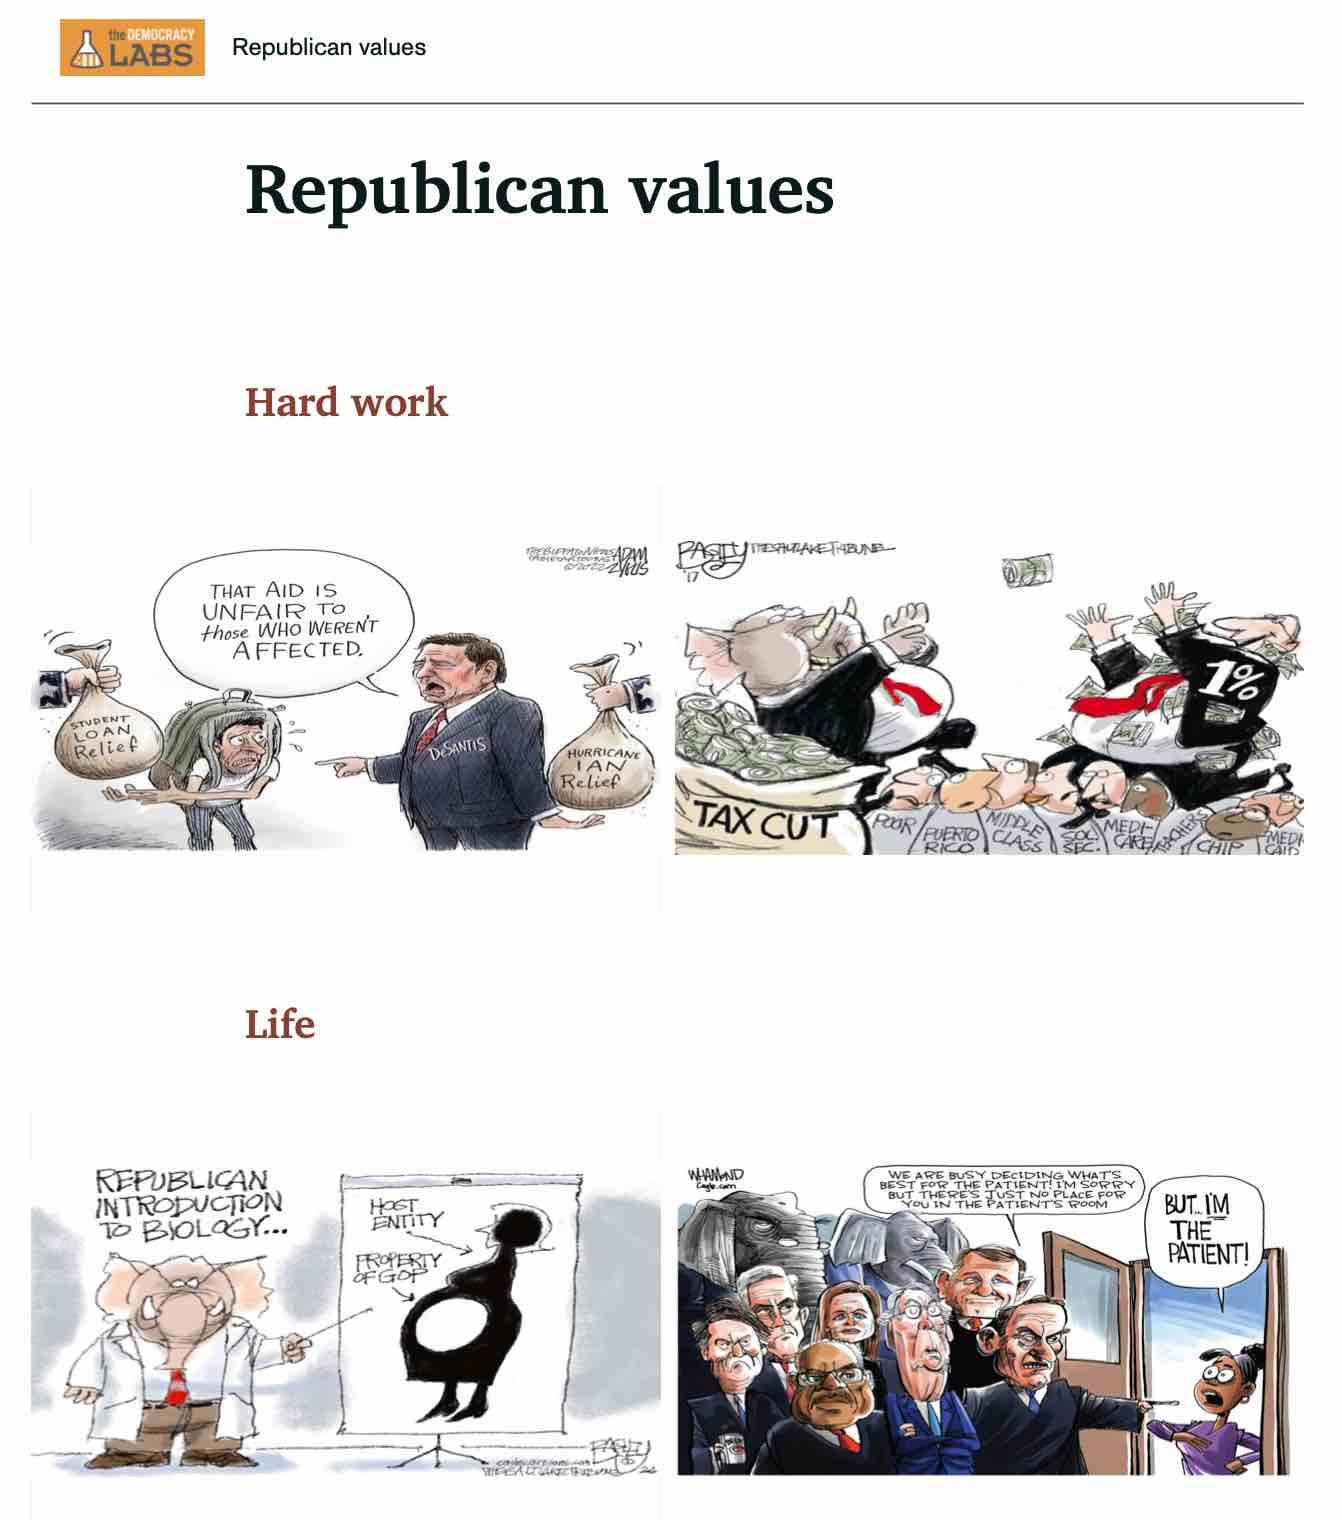 Republicans claim to stand for justice, patriotism and the rule of law. Animal Farm shows how do high minded principles get bastardized? Check this guide and decide for yourself.